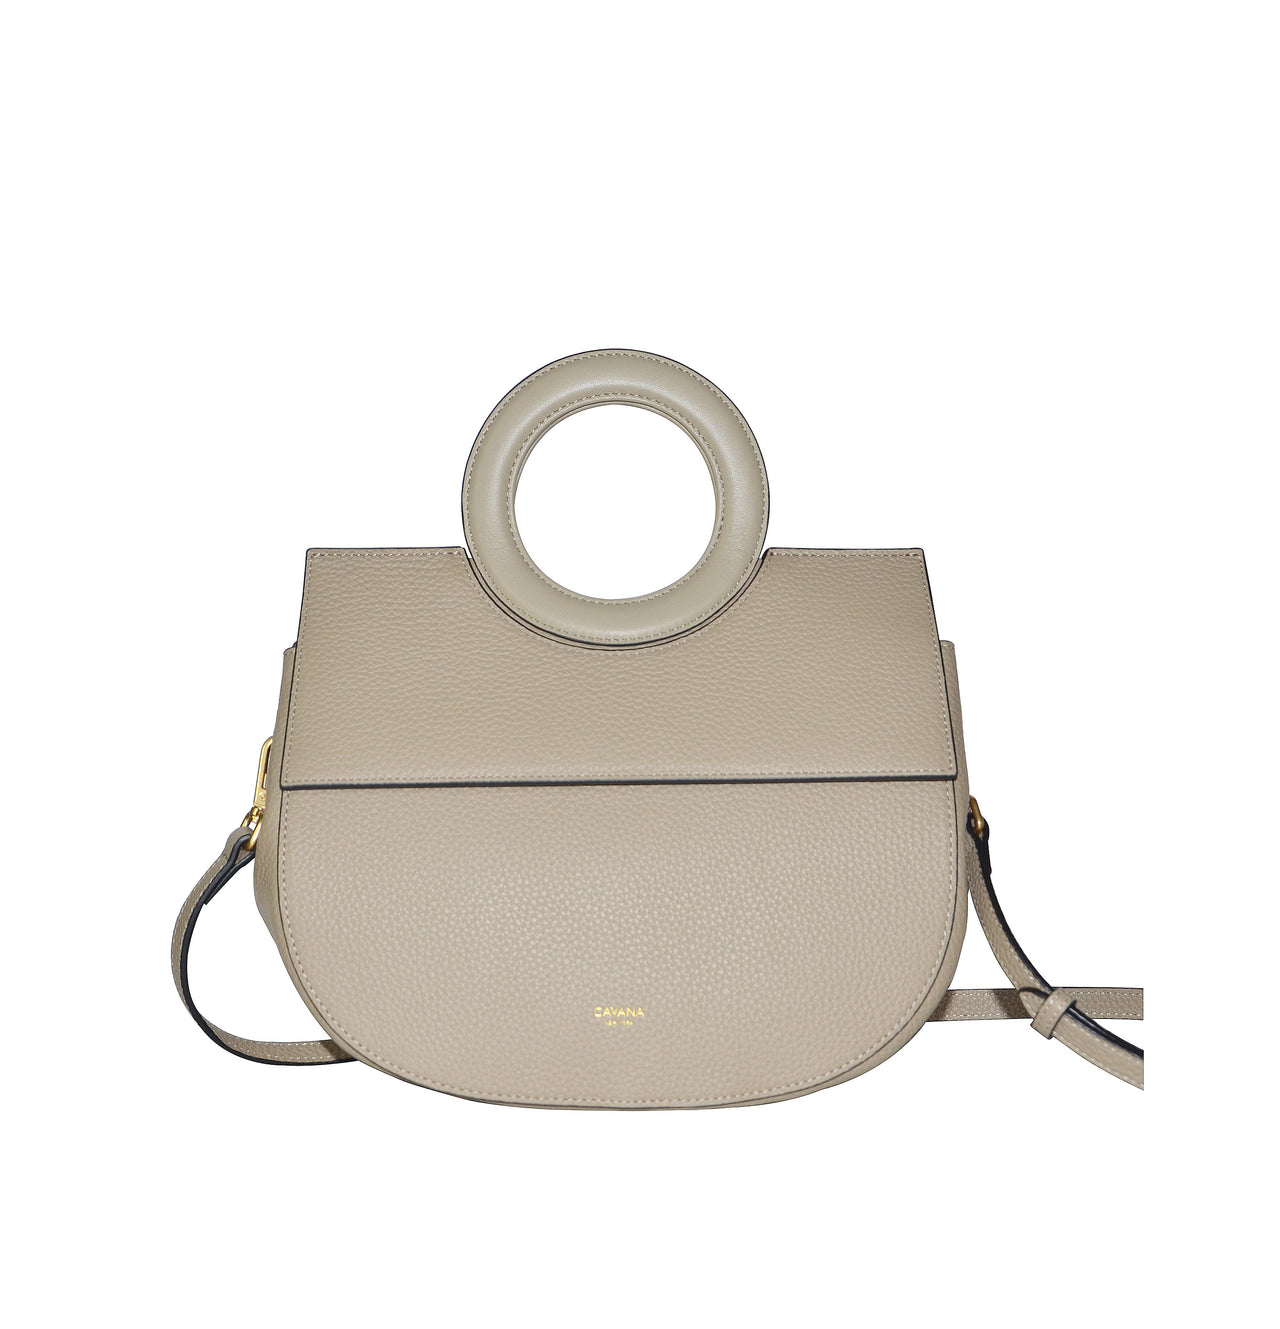 MILAN MOON BAG L IN TRENCH